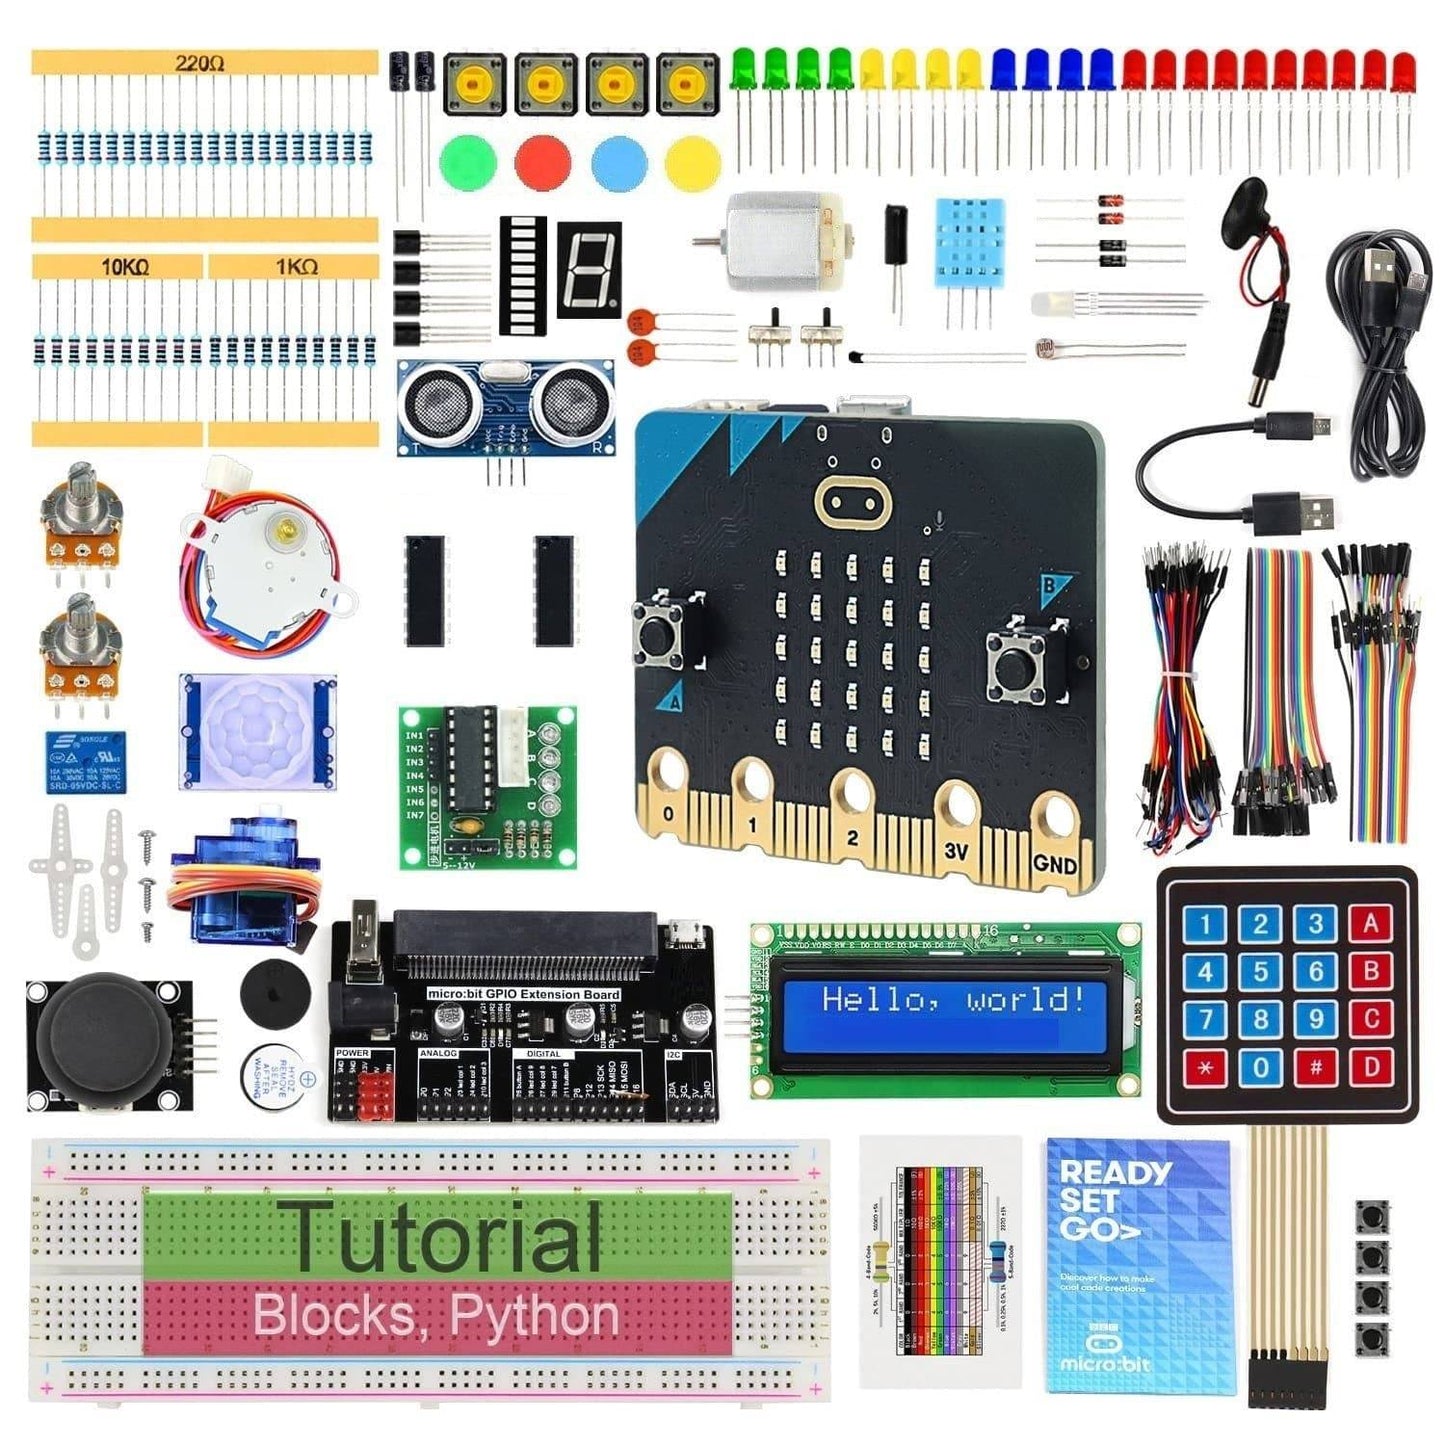 Ultimate Starter Kit for BBC Micro:bit Development Board (V2 Included), 316-Page Detailed Tutorial, 225 Items, 44 Projects - REES52